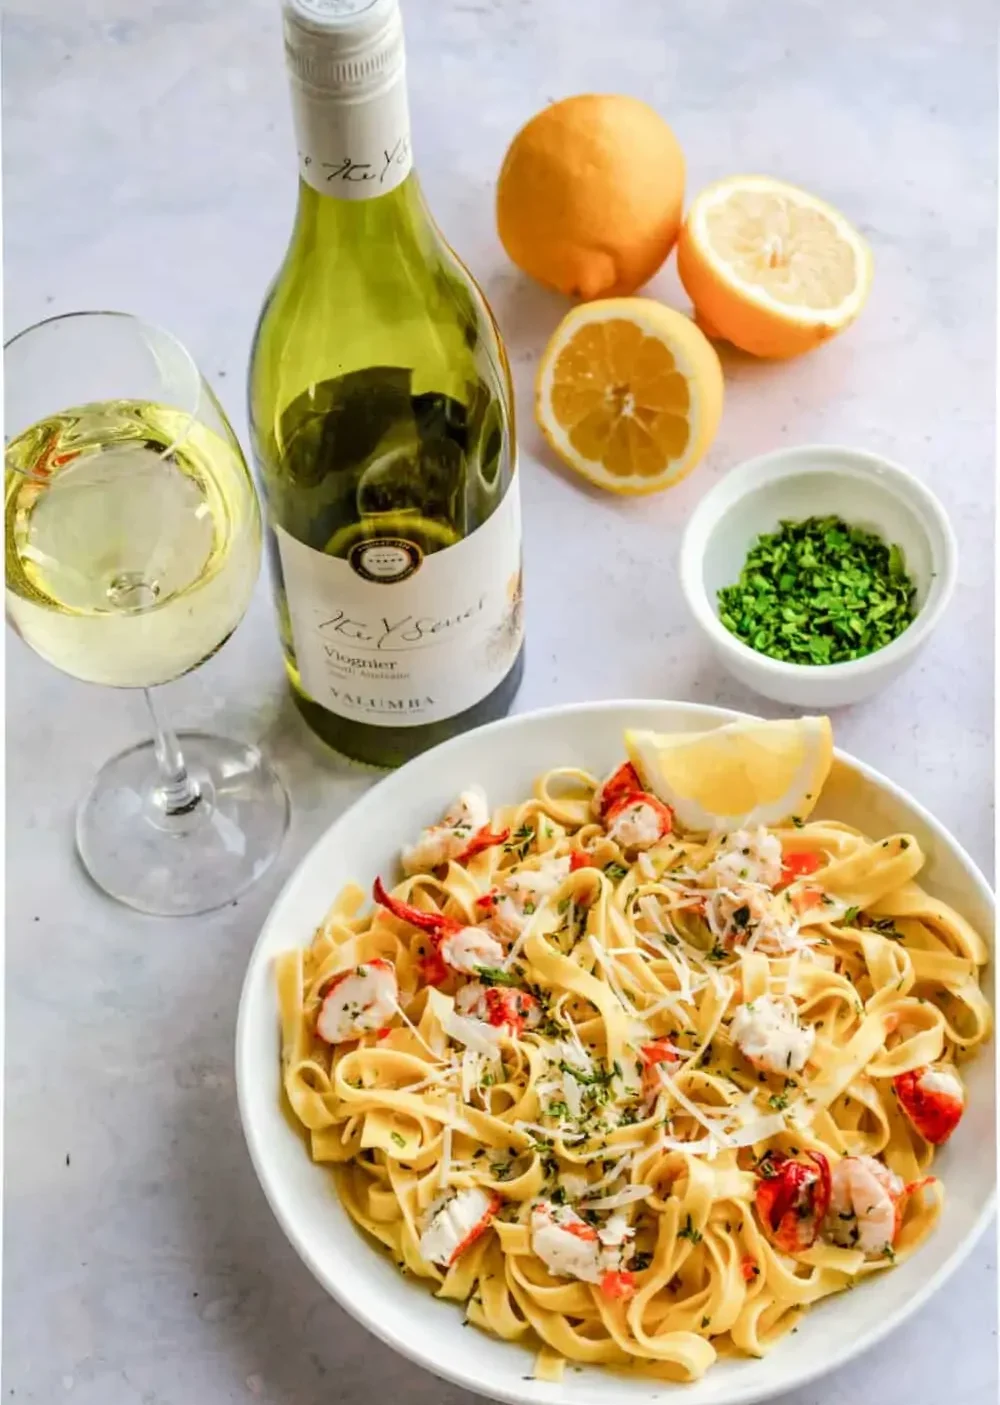 lobster pasta with lemons and wine glass and bottle of wine and green herbs